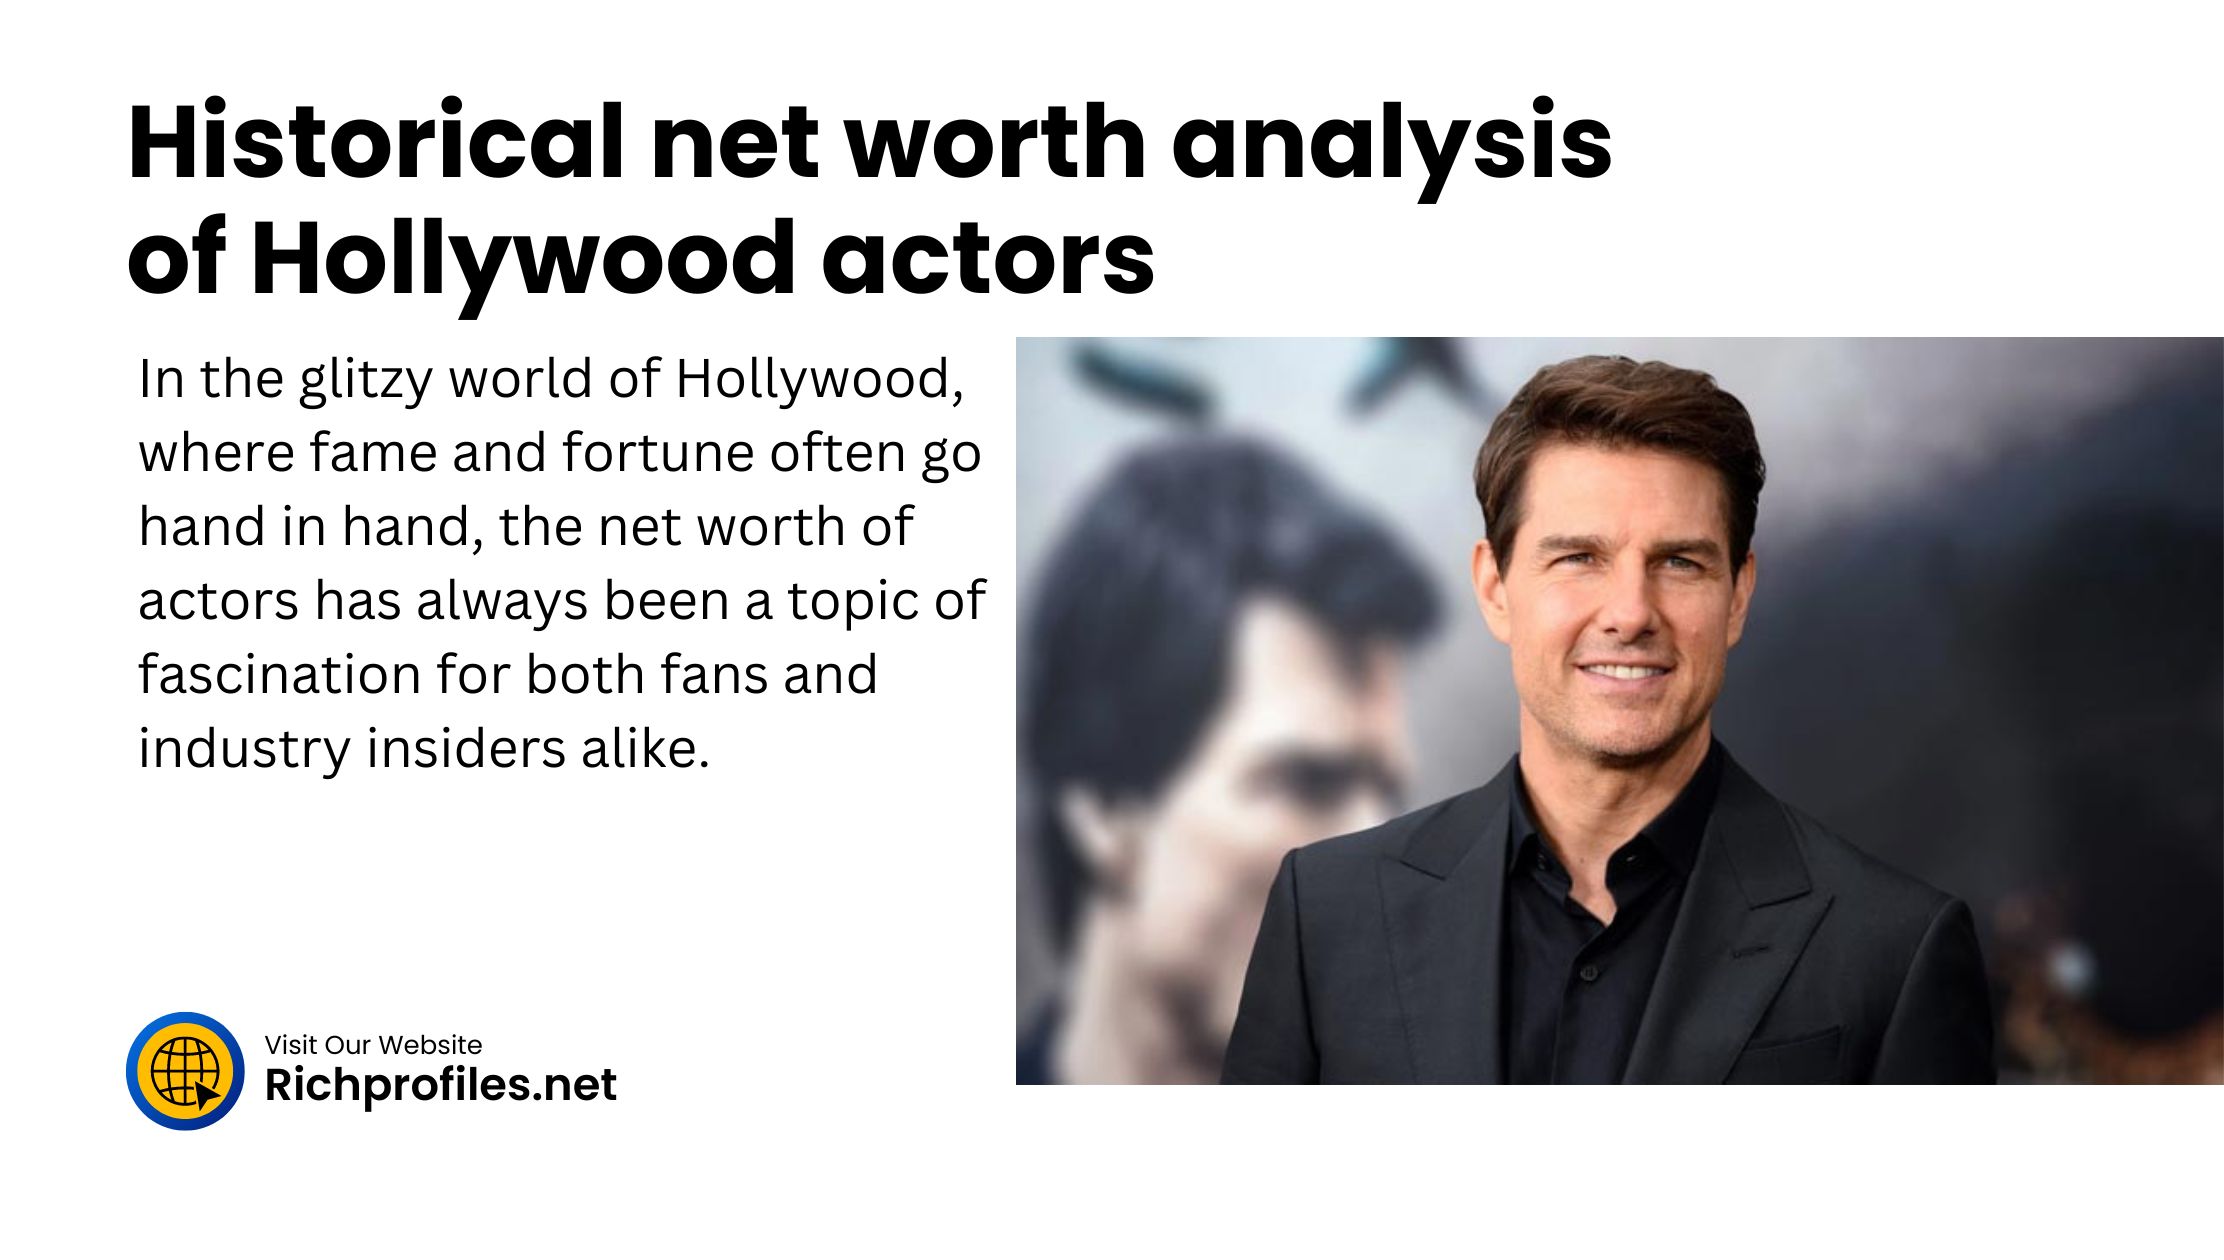 Historical net worth analysis of Hollywood actors